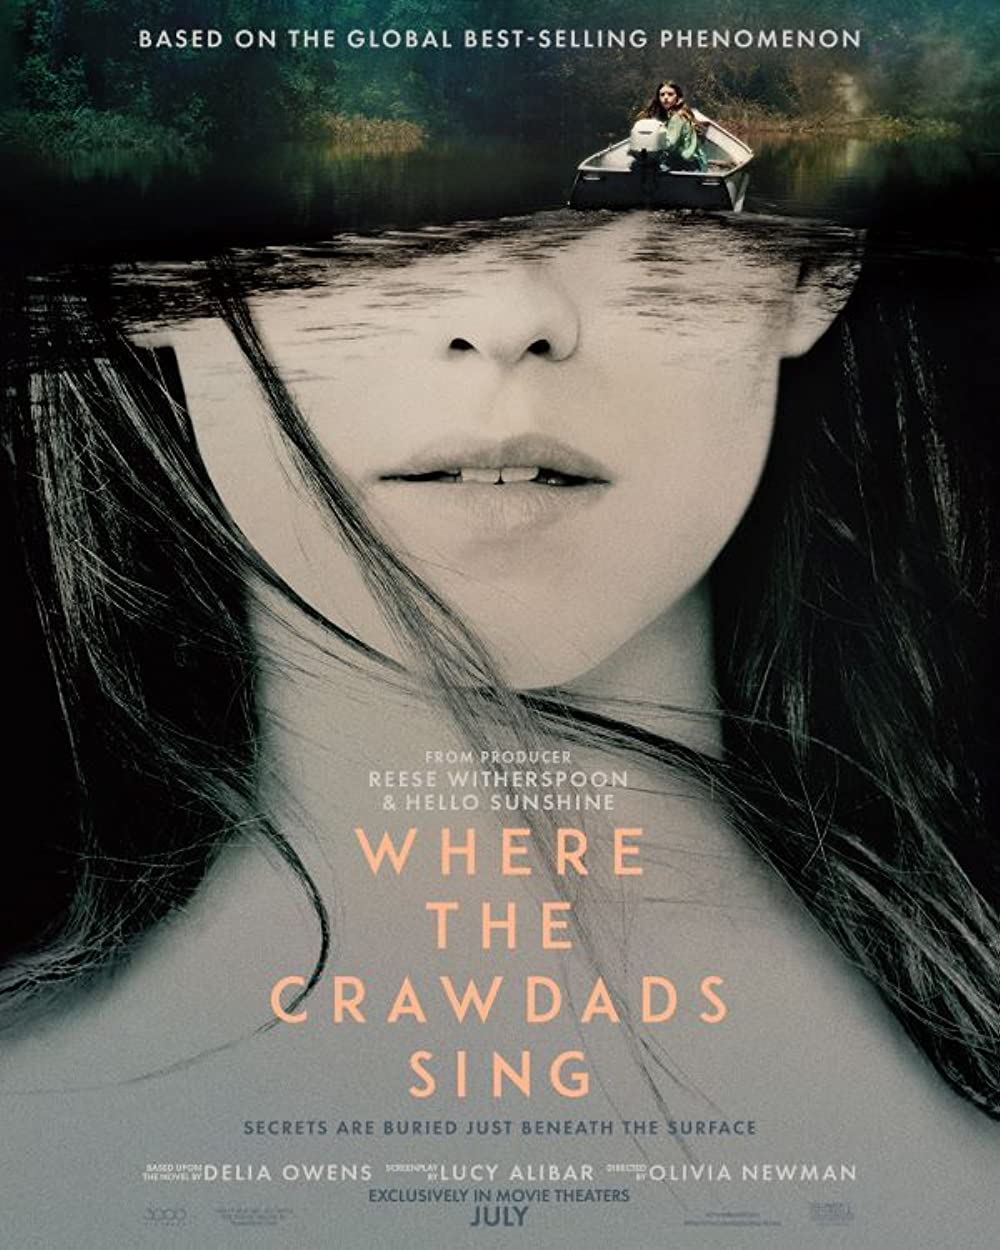 Cover Art for "Where the Crawdads Sing"